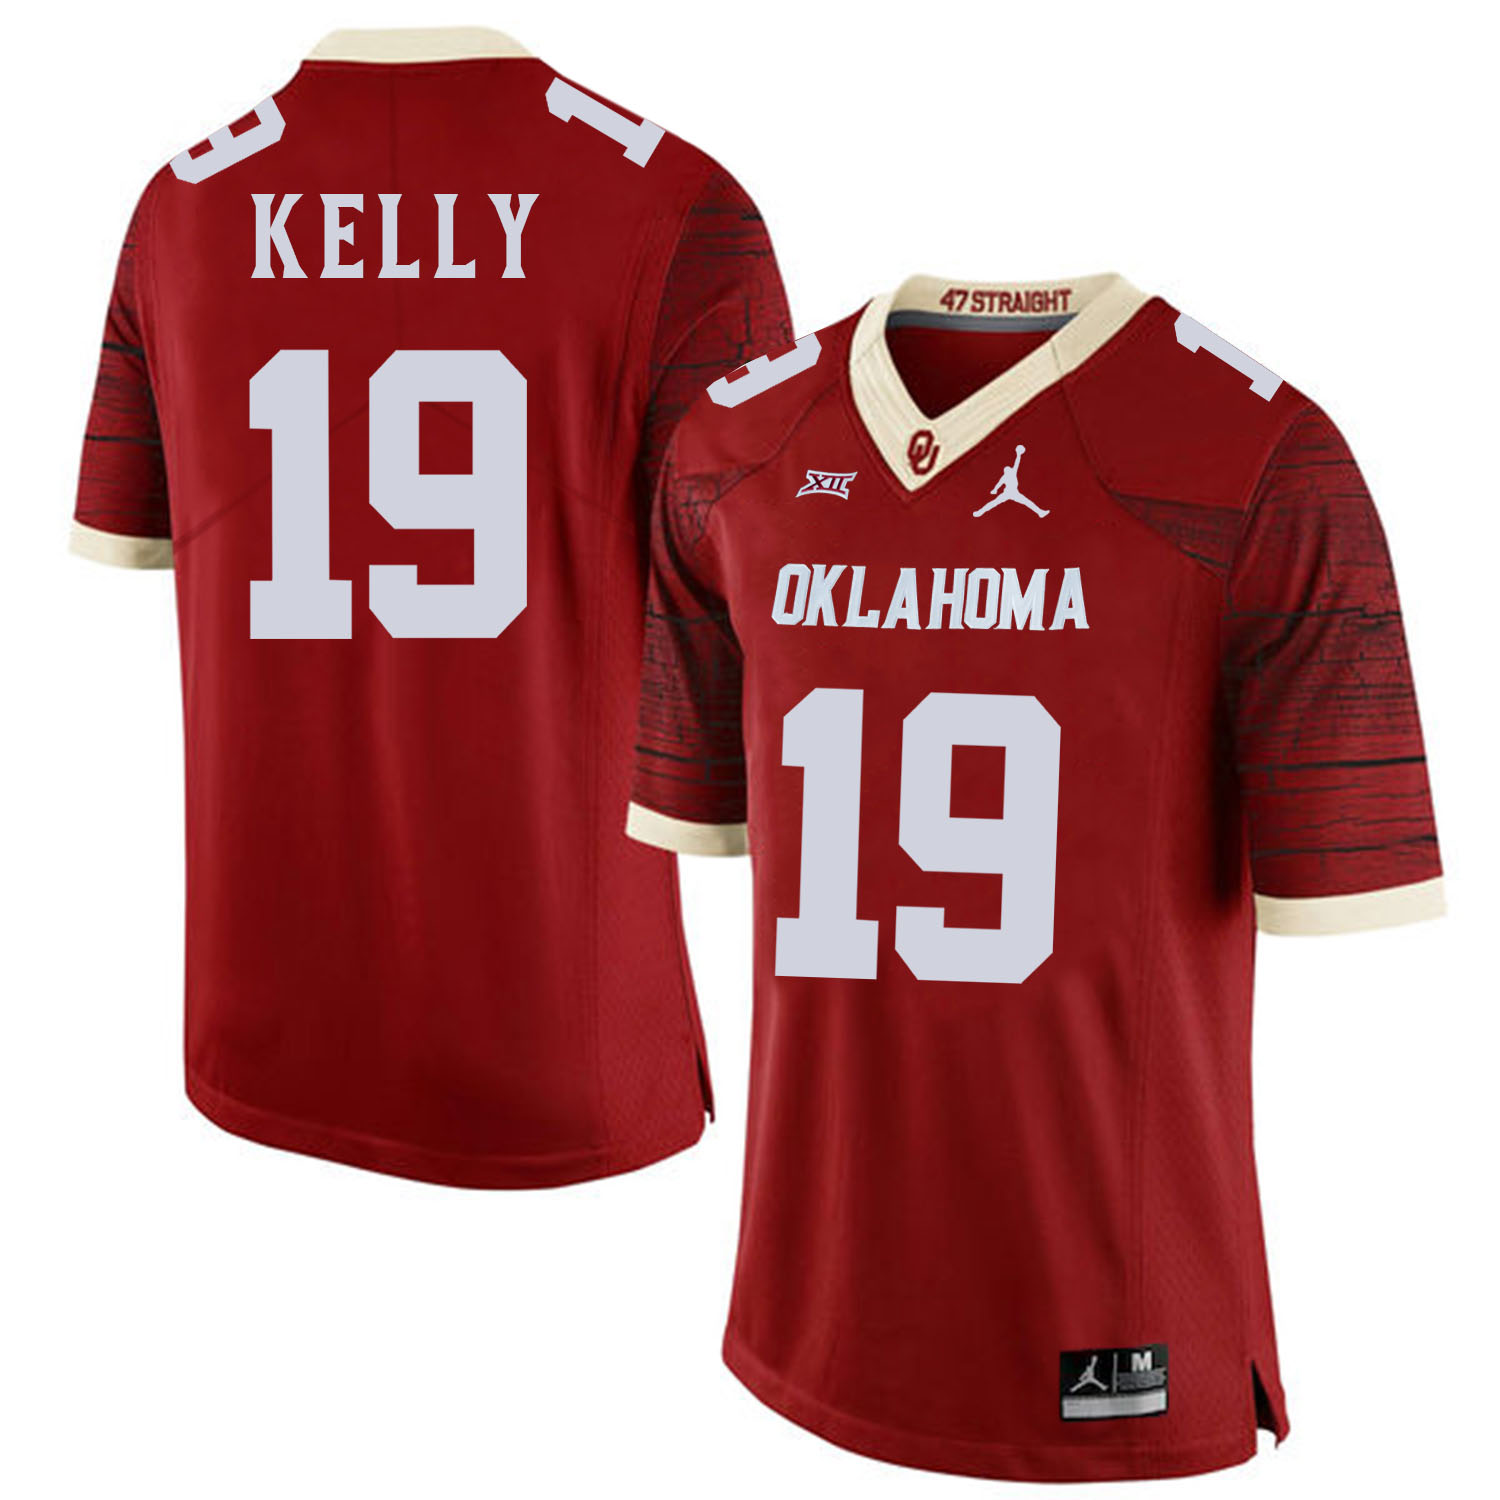 Oklahoma Sooners 19 Caleb Kelly Red 47 Game Winning Streak College Football Jersey - Click Image to Close